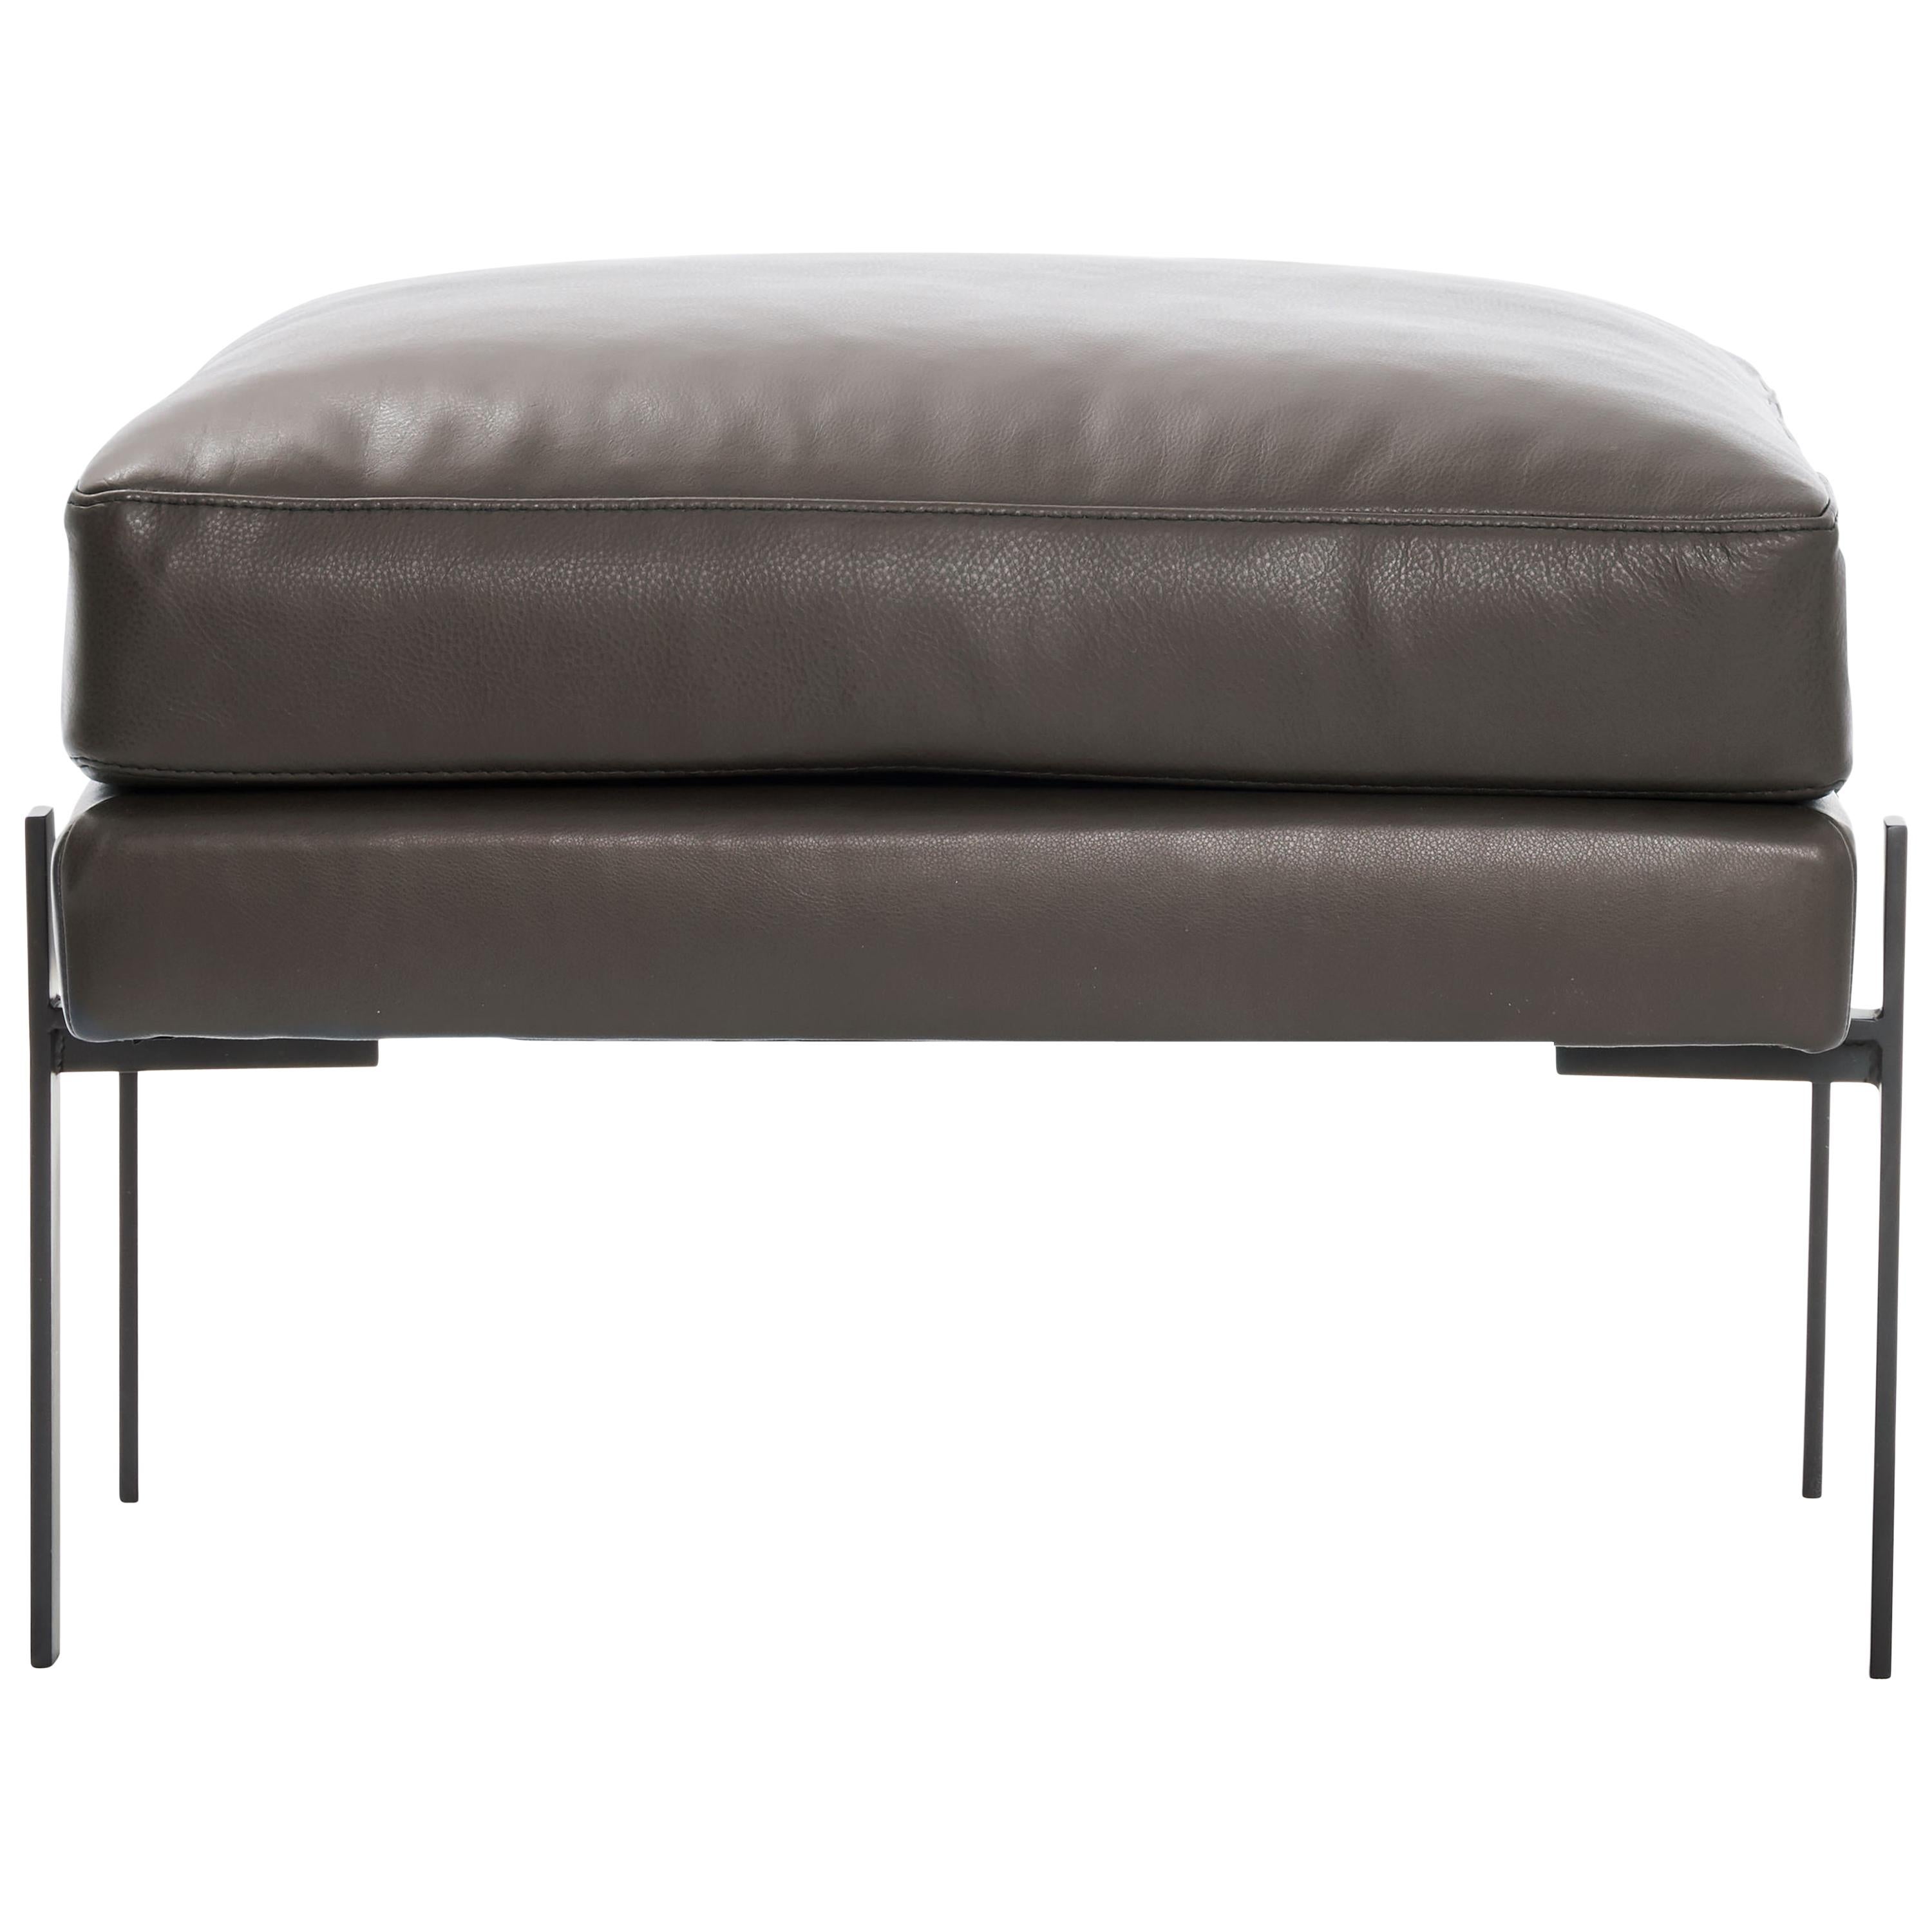 Truss Ottoman in Greige Leather & Powder-Coated Steel by TRNK For Sale